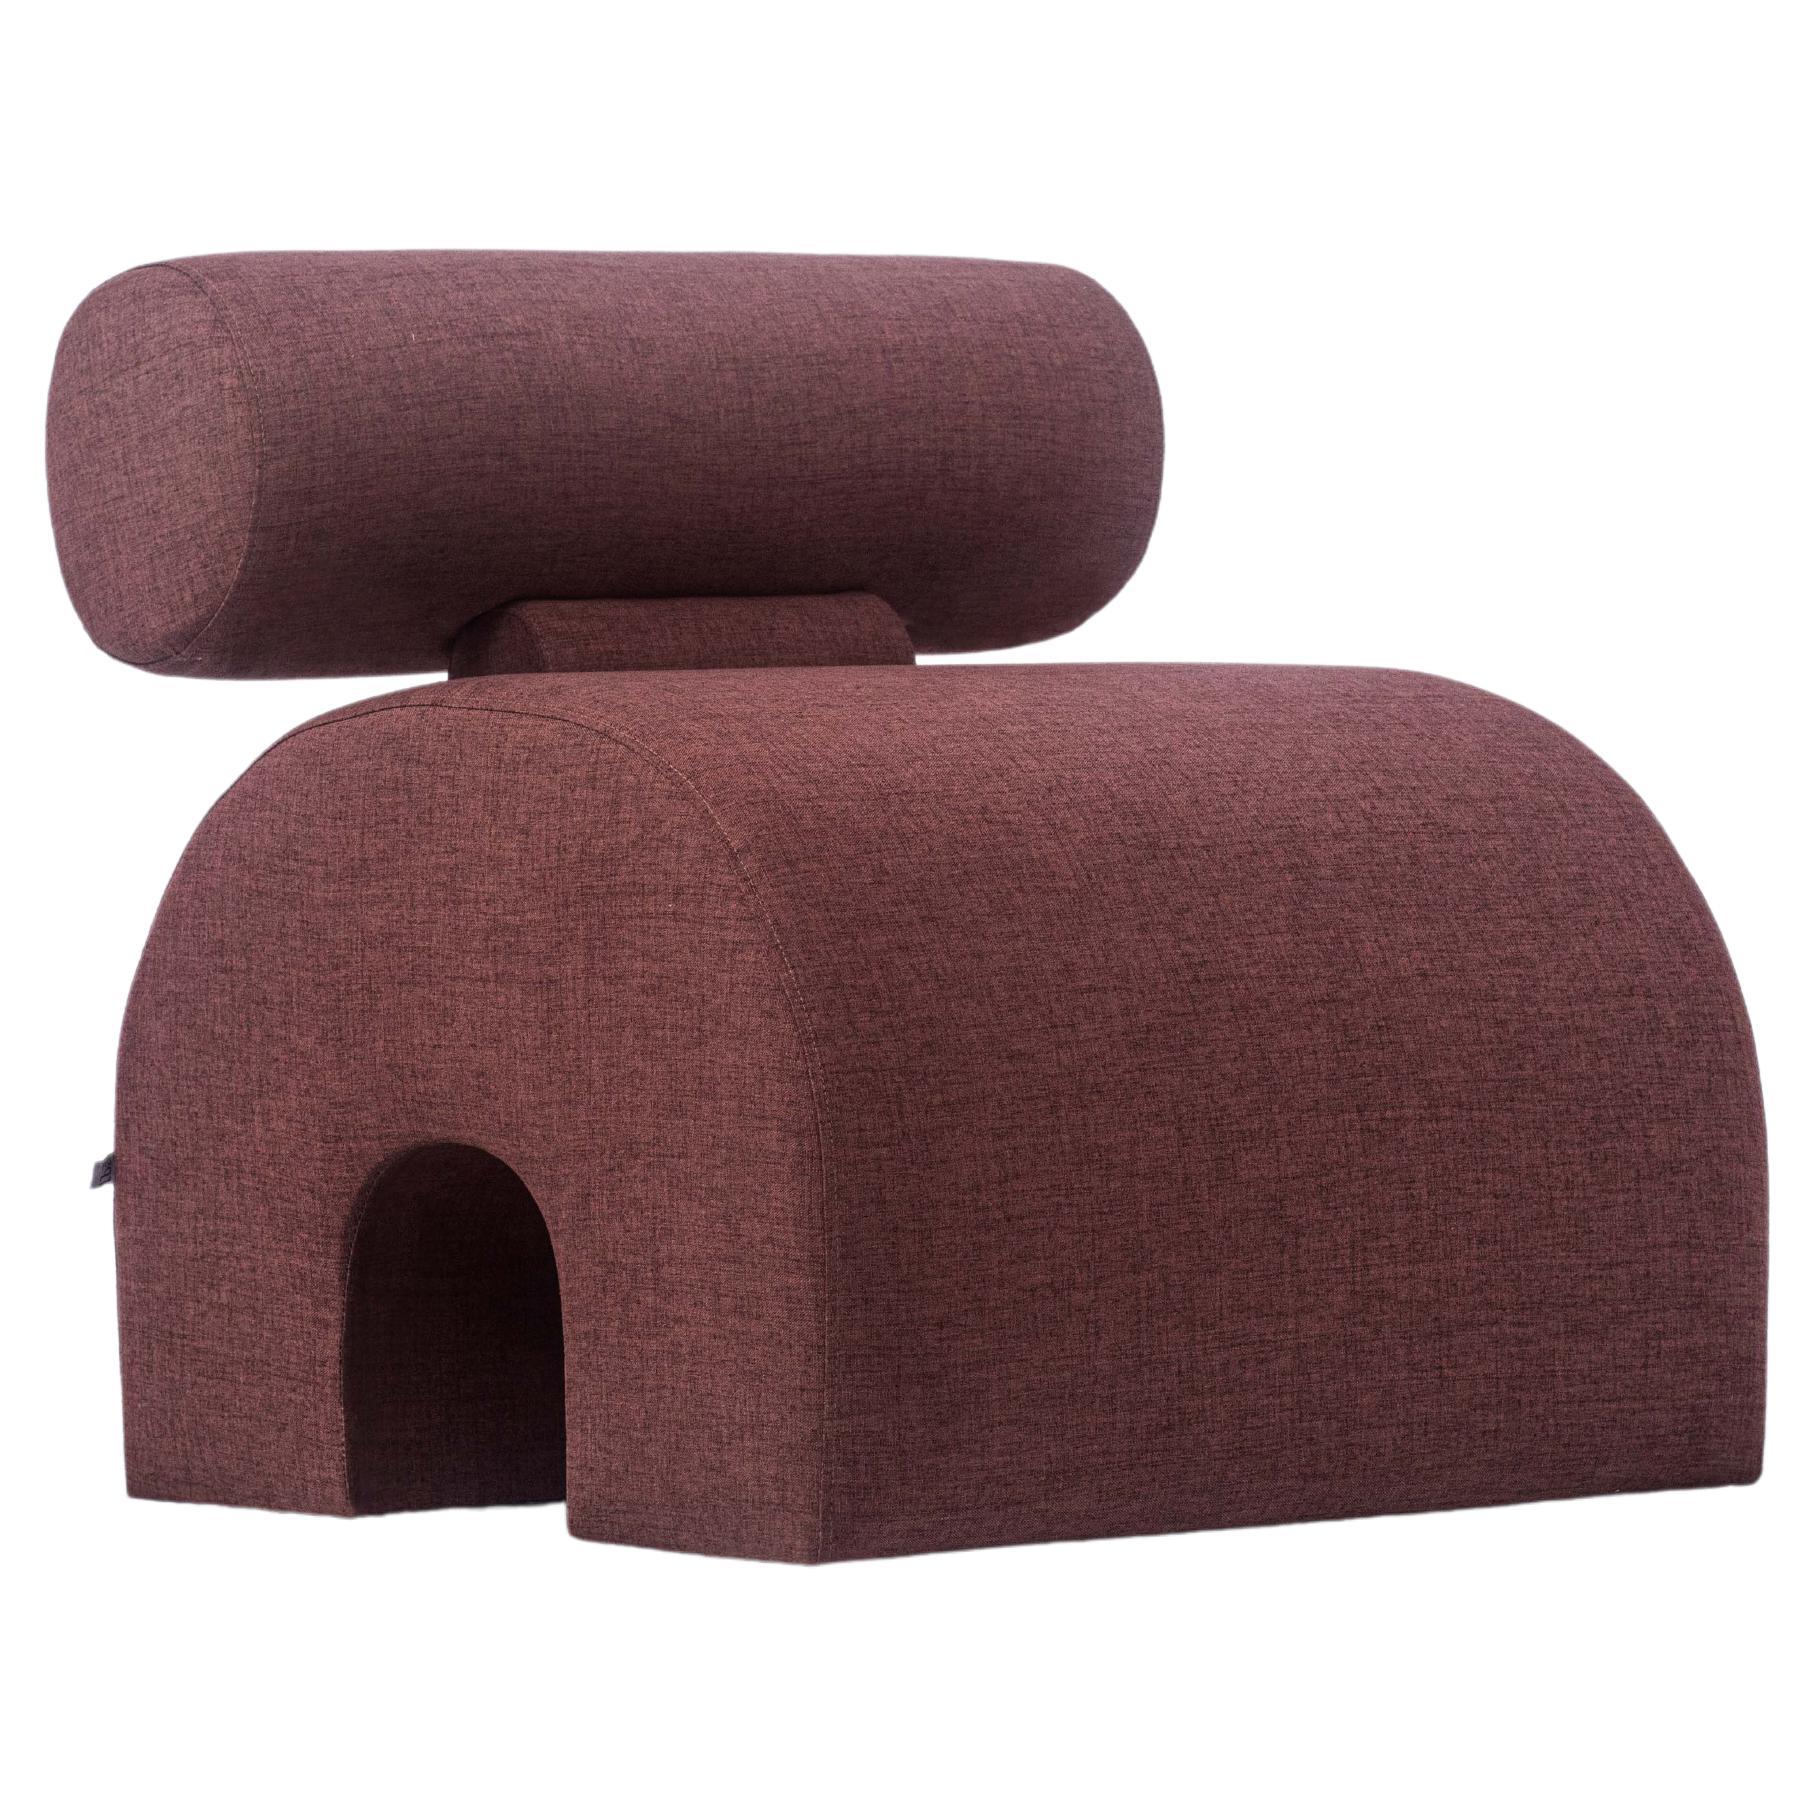 Modern Lounge Chair / Slipper Chair in Berry Color For Sale